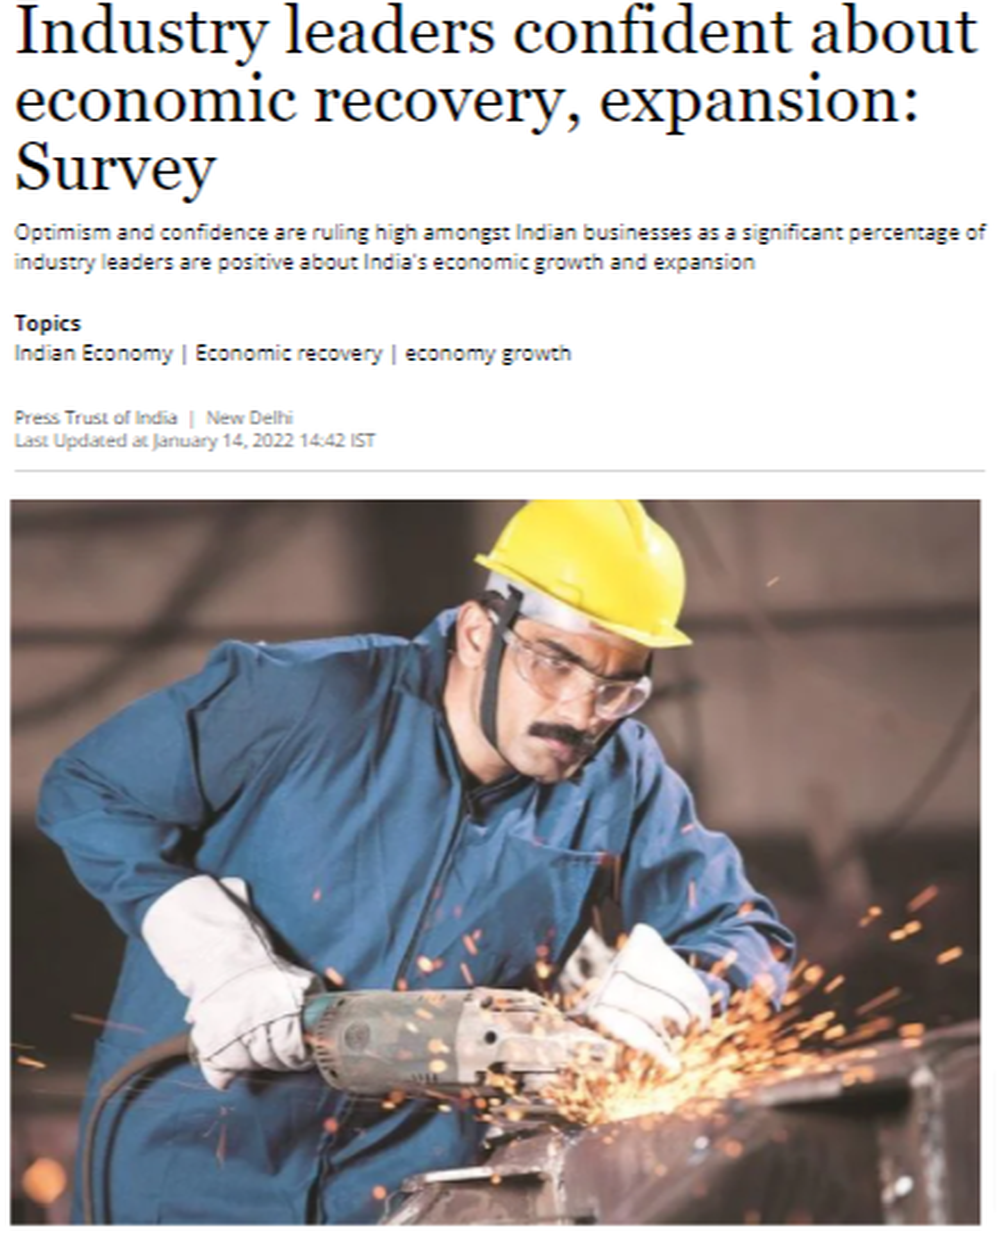 Industry-leaders-confident-about-economic-recovery-expansion-Survey-Business-Standard-News.png